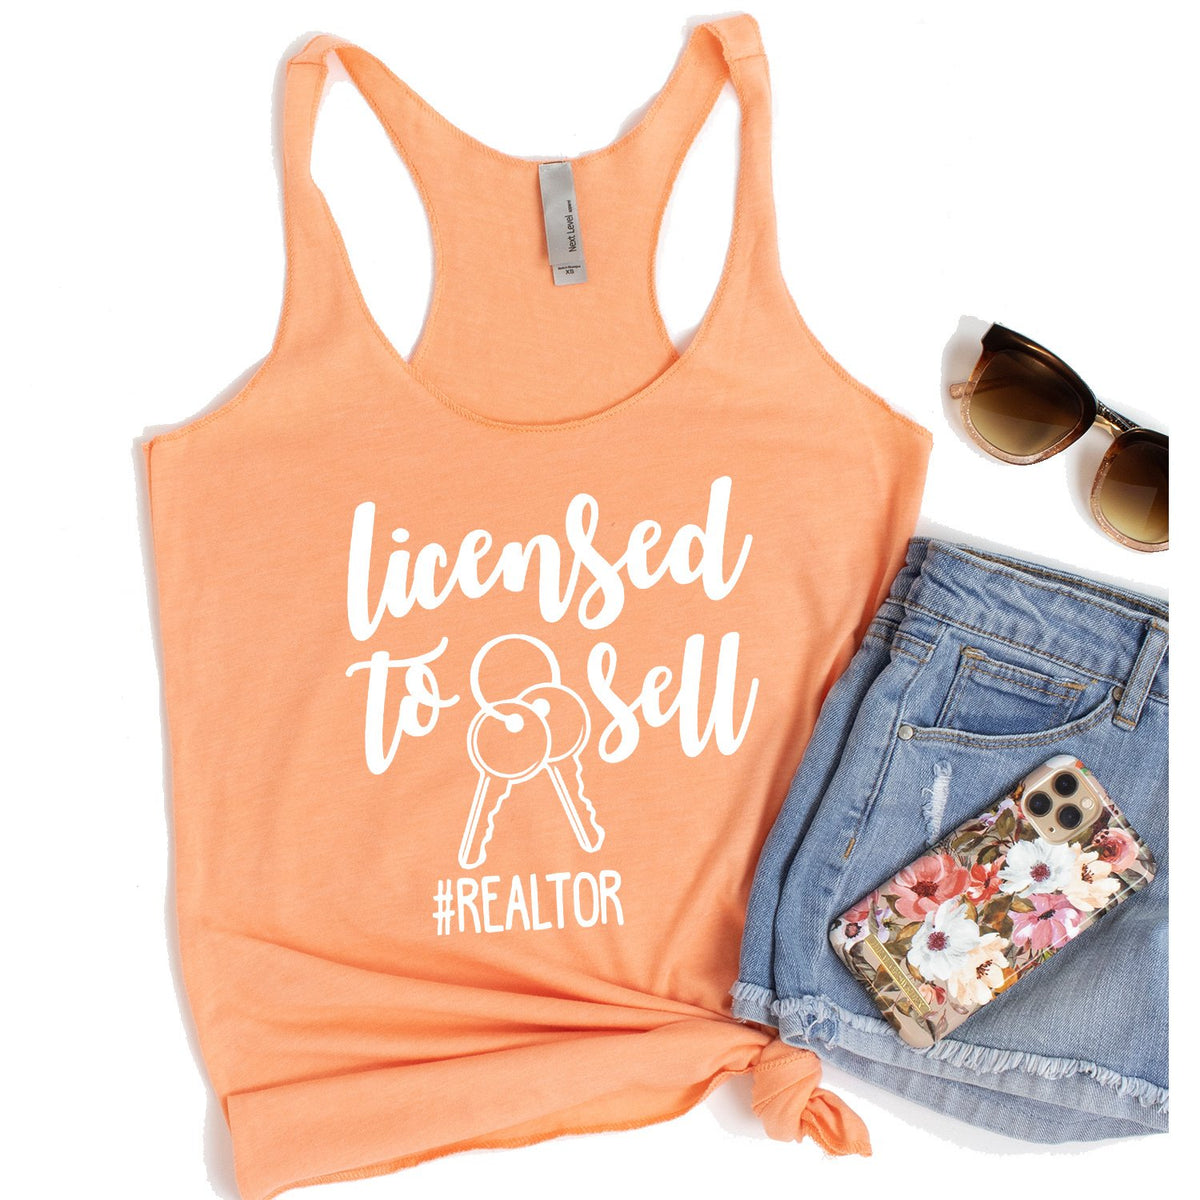 Licensed To Sell - Tank Top Racerback